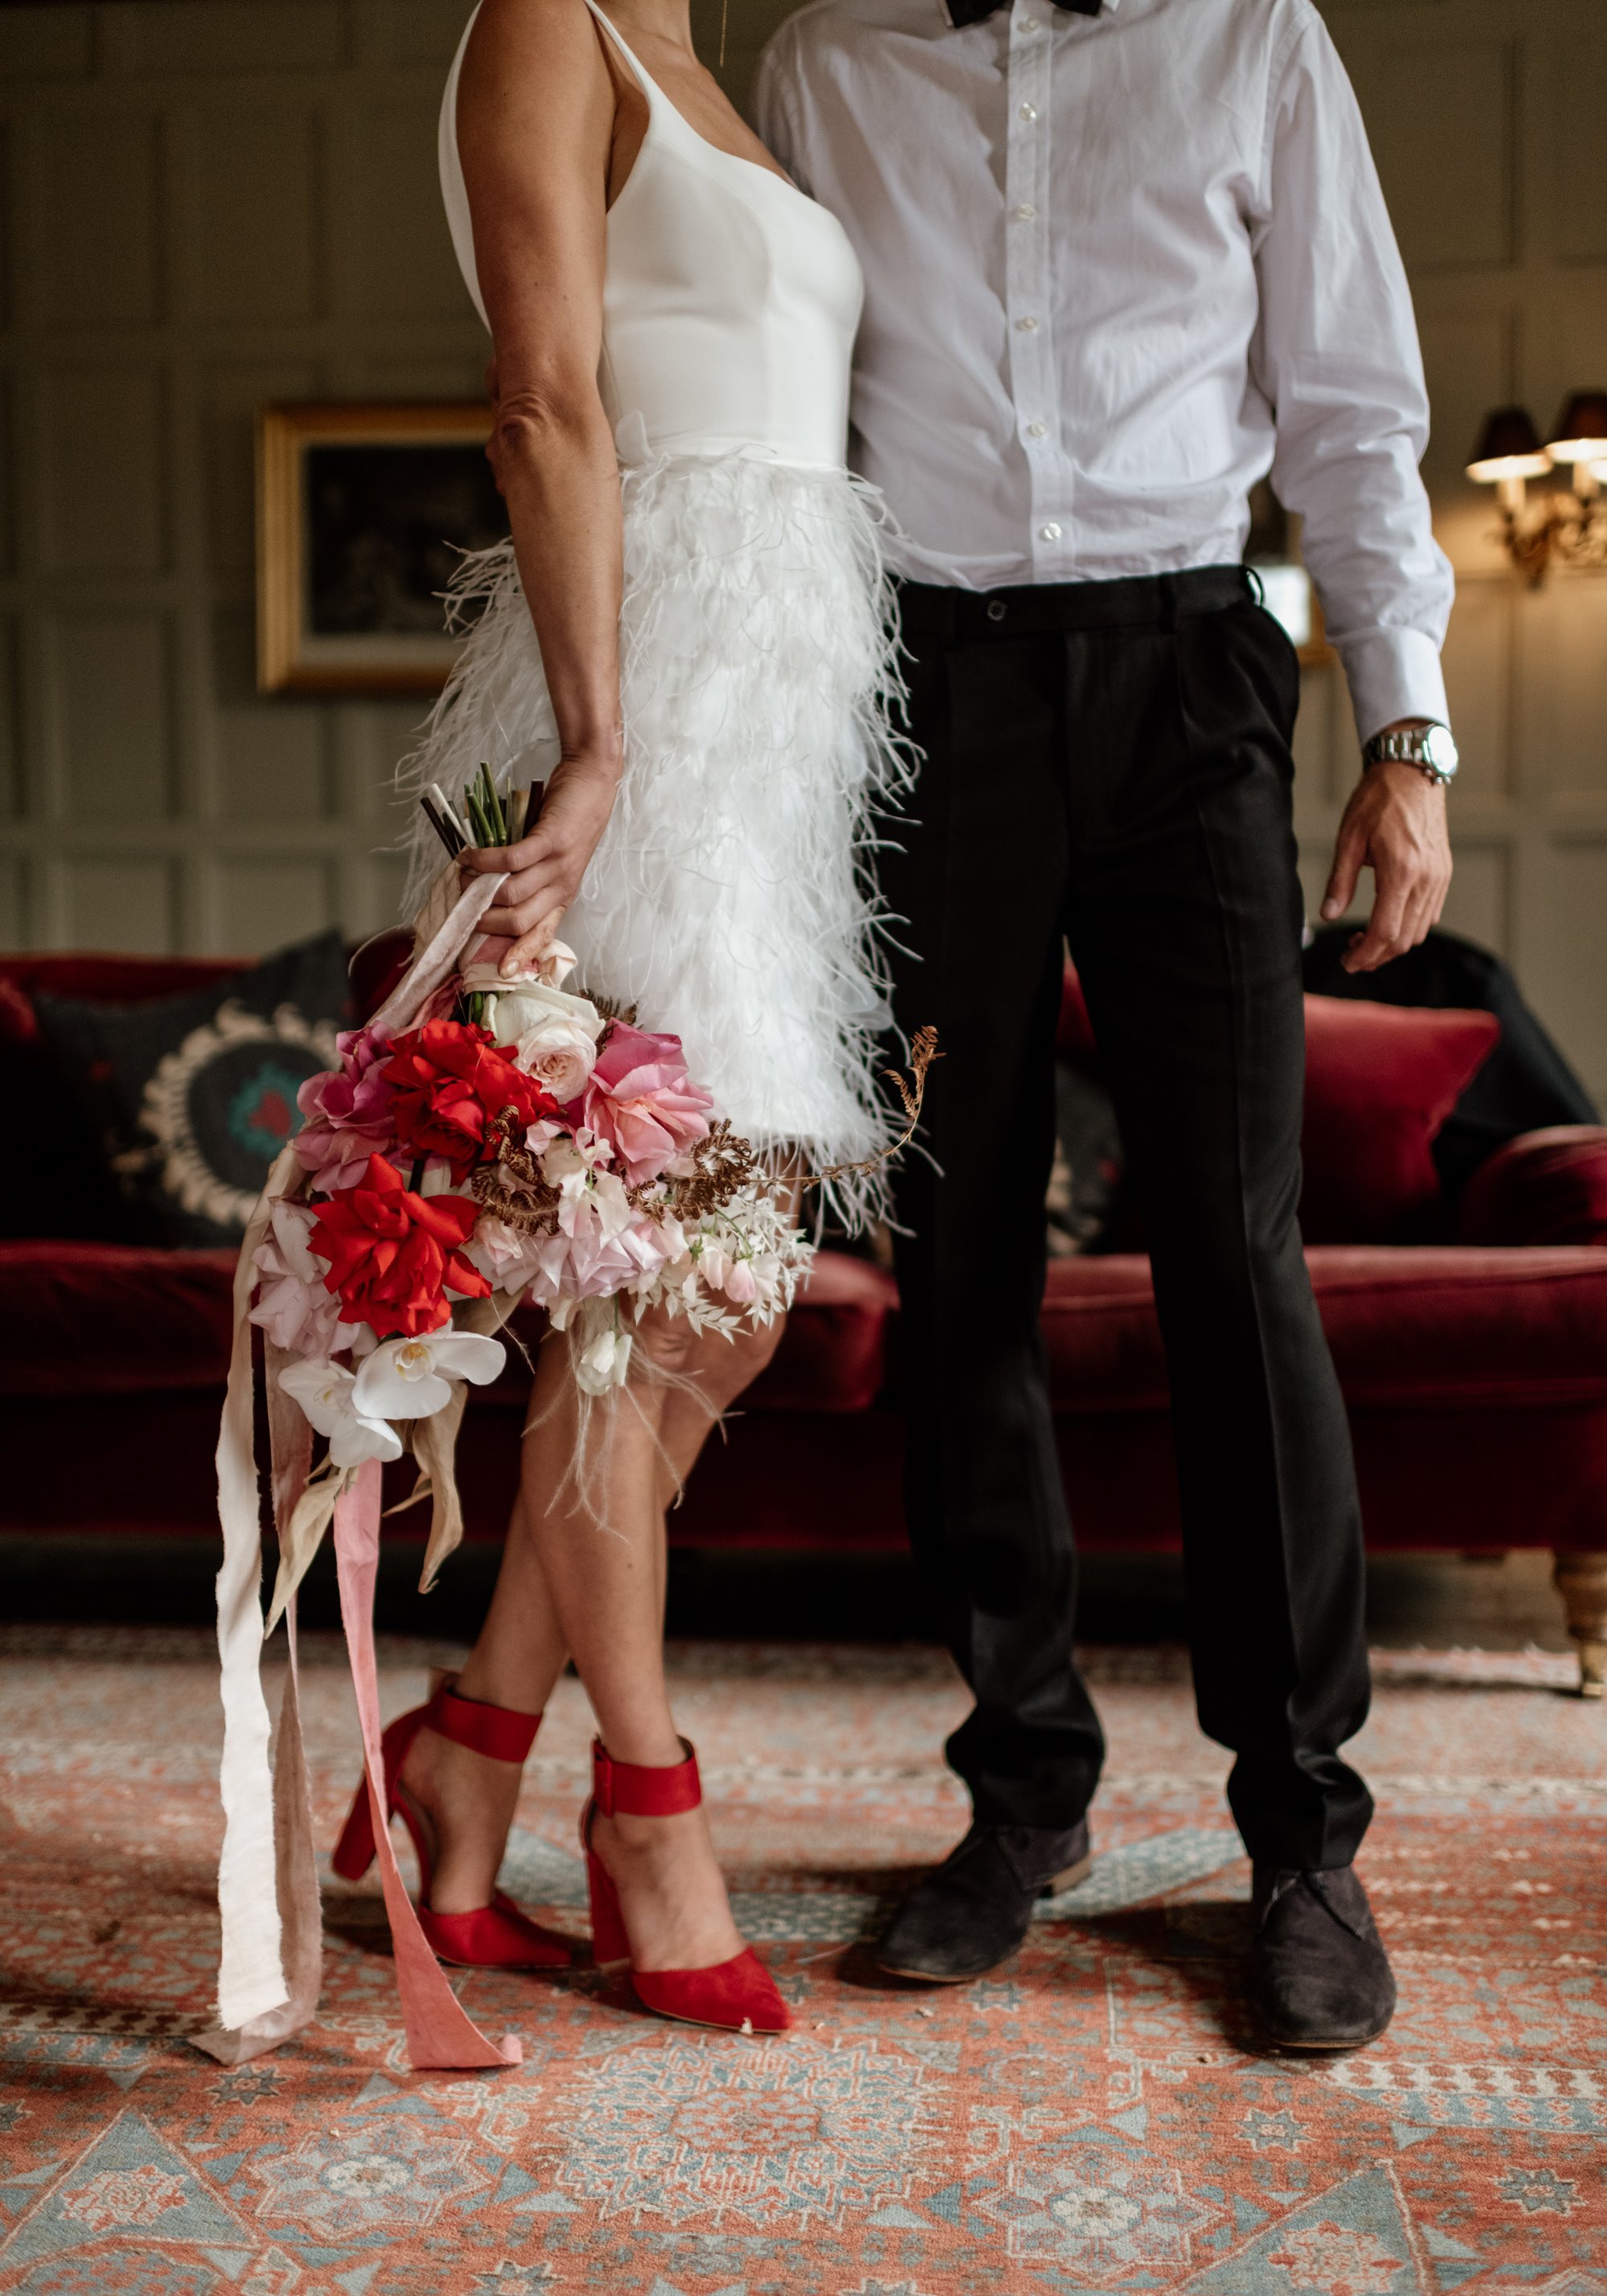 Bride and groom posing for a red and white themed wedding, with bright red high heels and a bouquet of red flowers